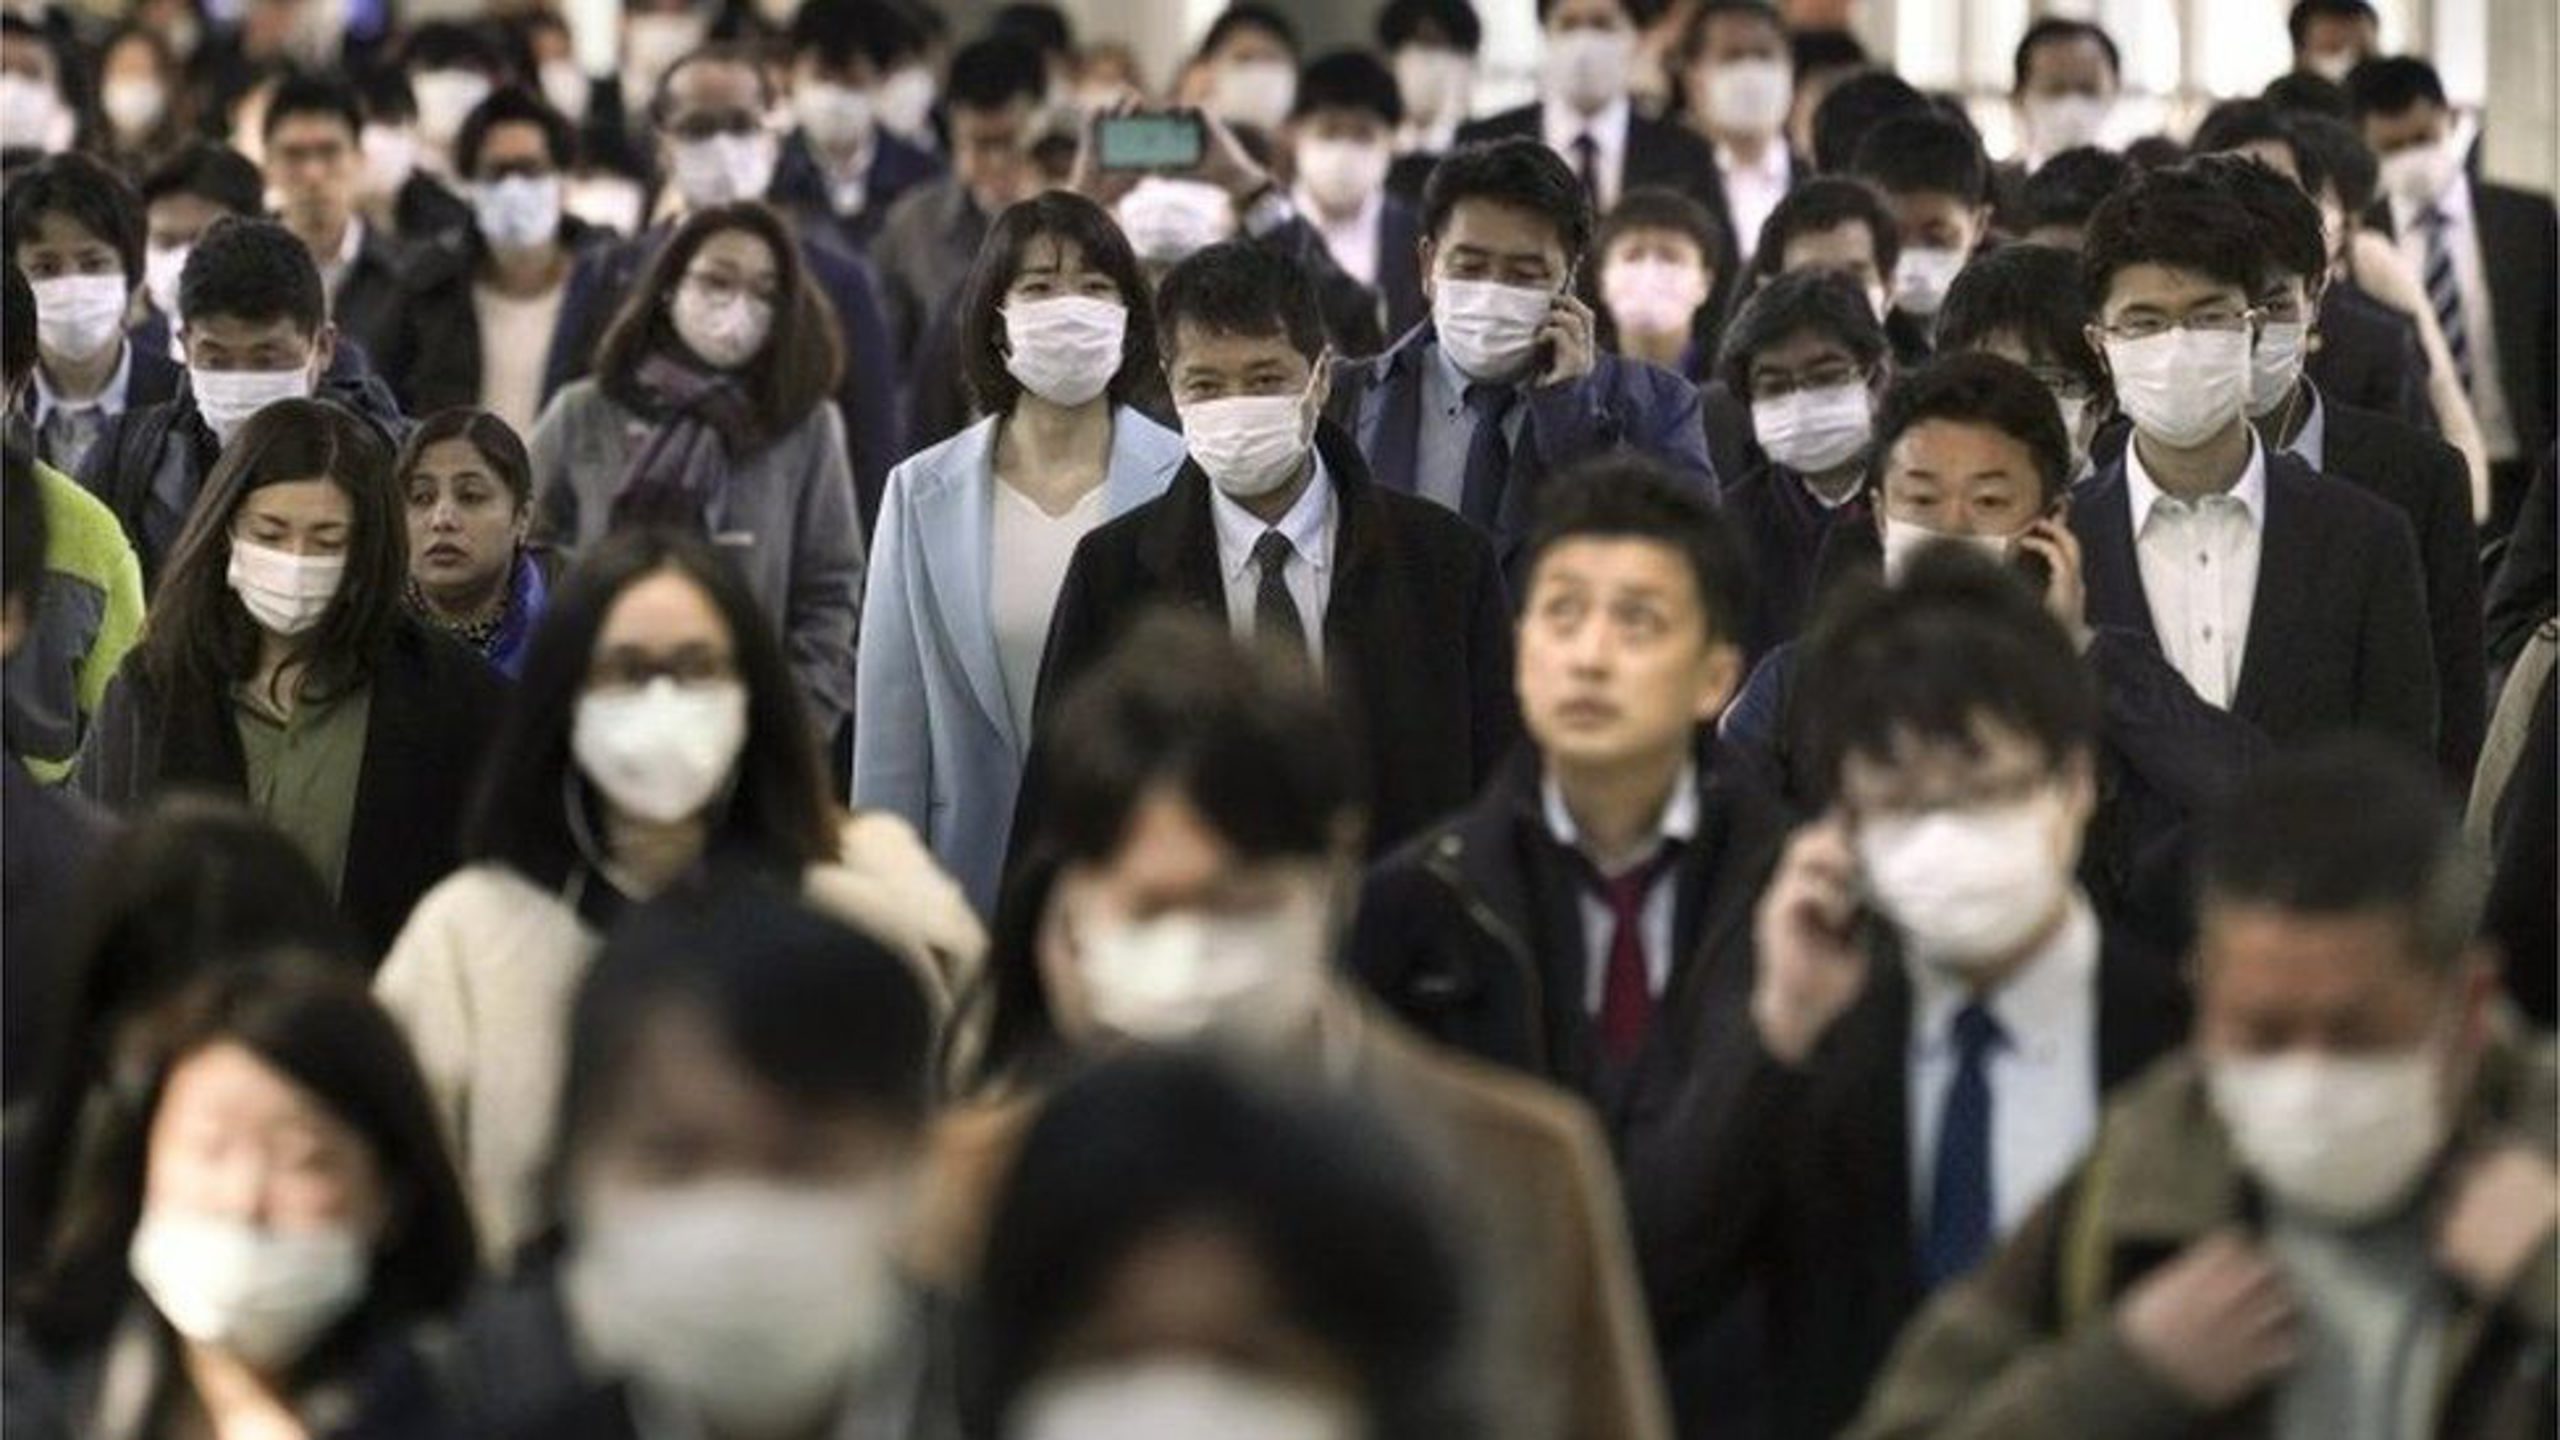 Residents of Japan masking up against the COVID-19 pandemic